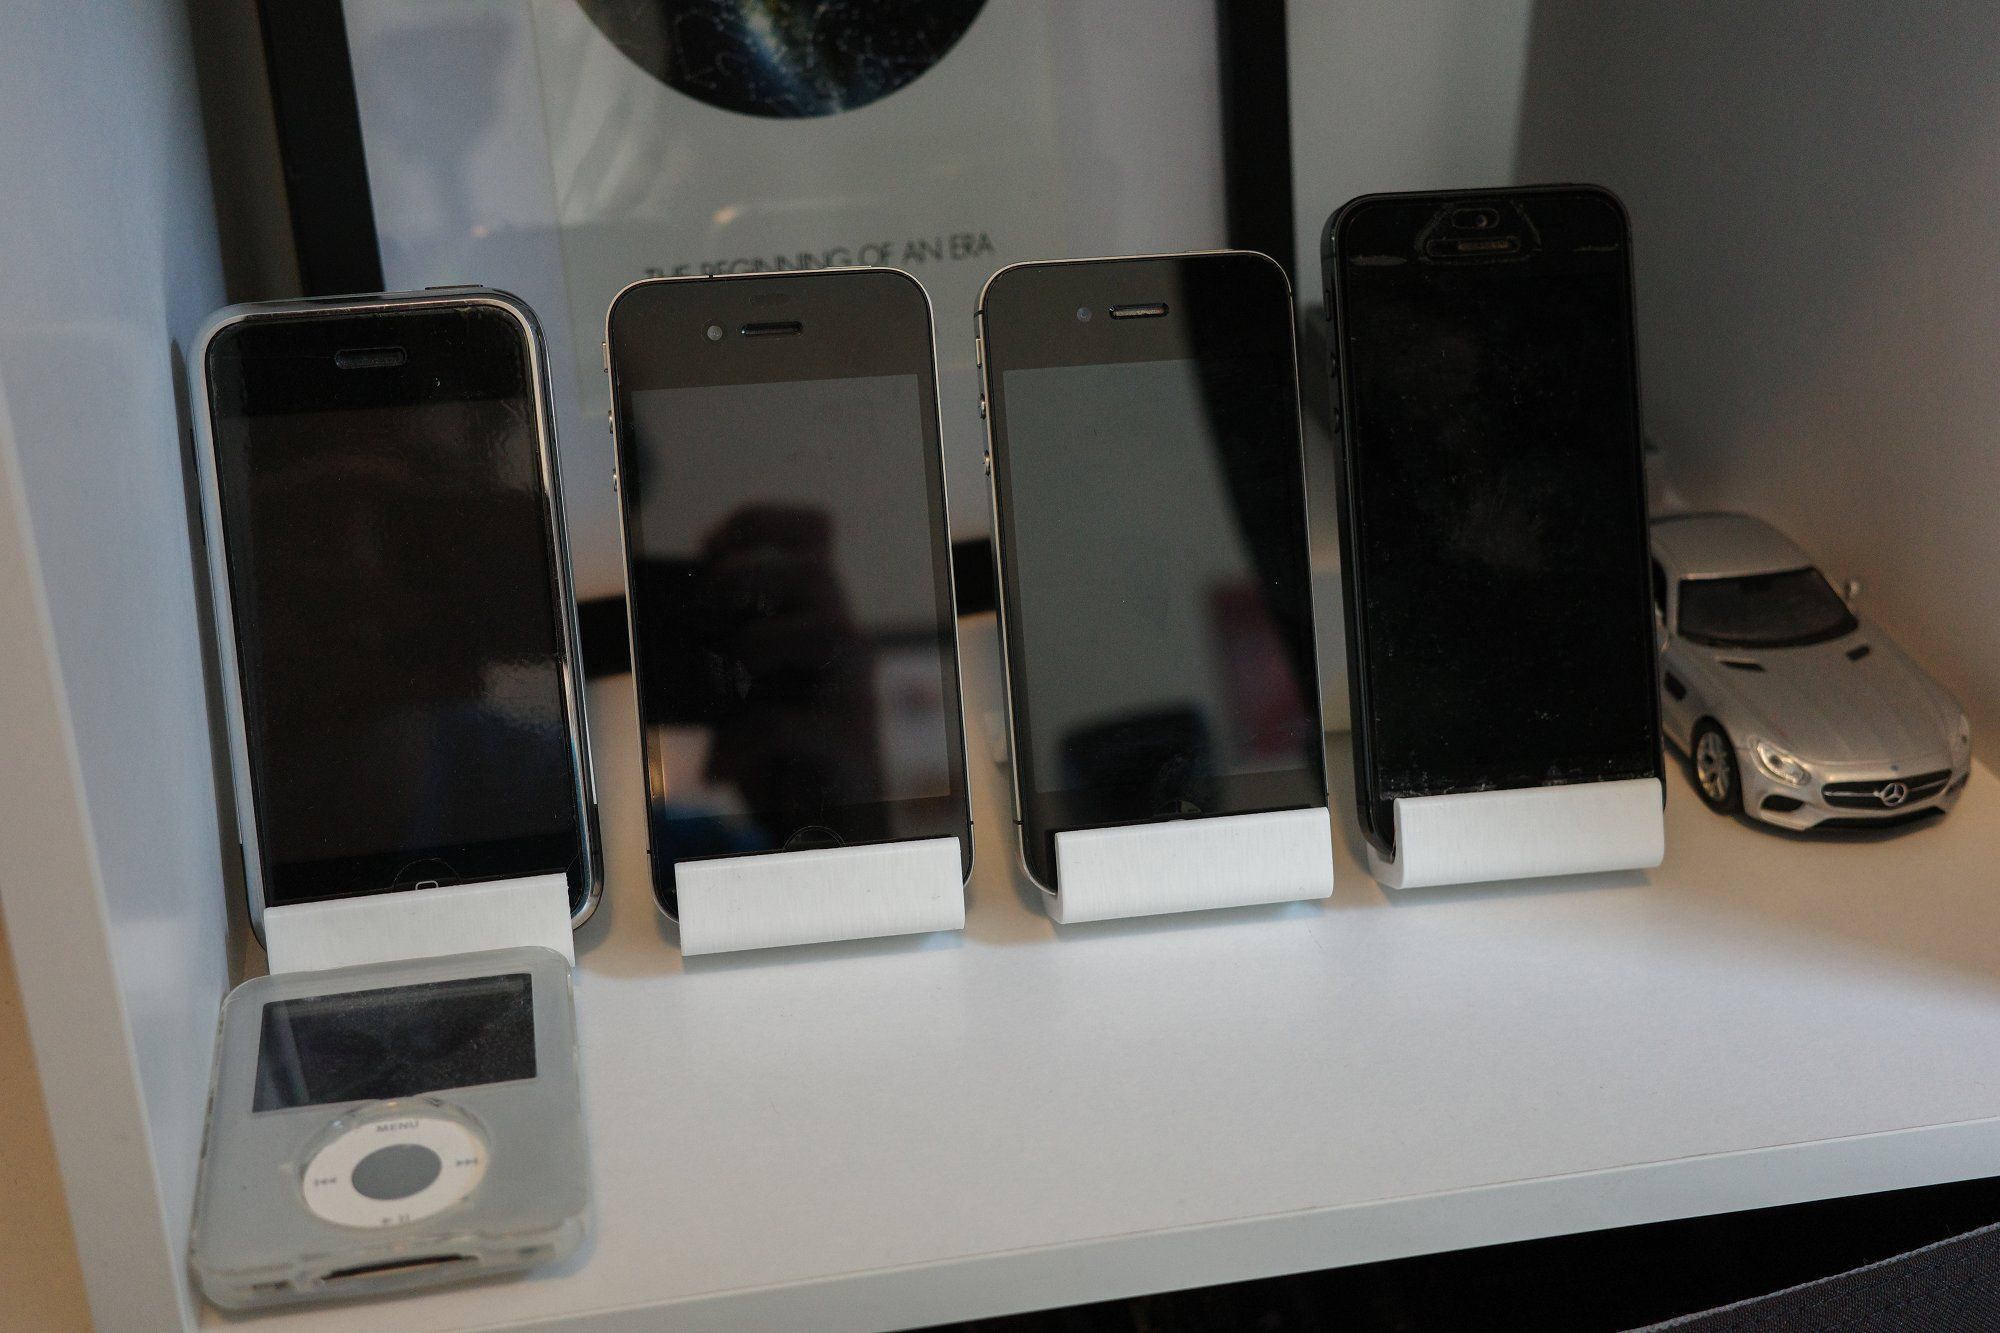 A collection of Apple mobile devices, namely iPhones, lined up in chronological order from left to right